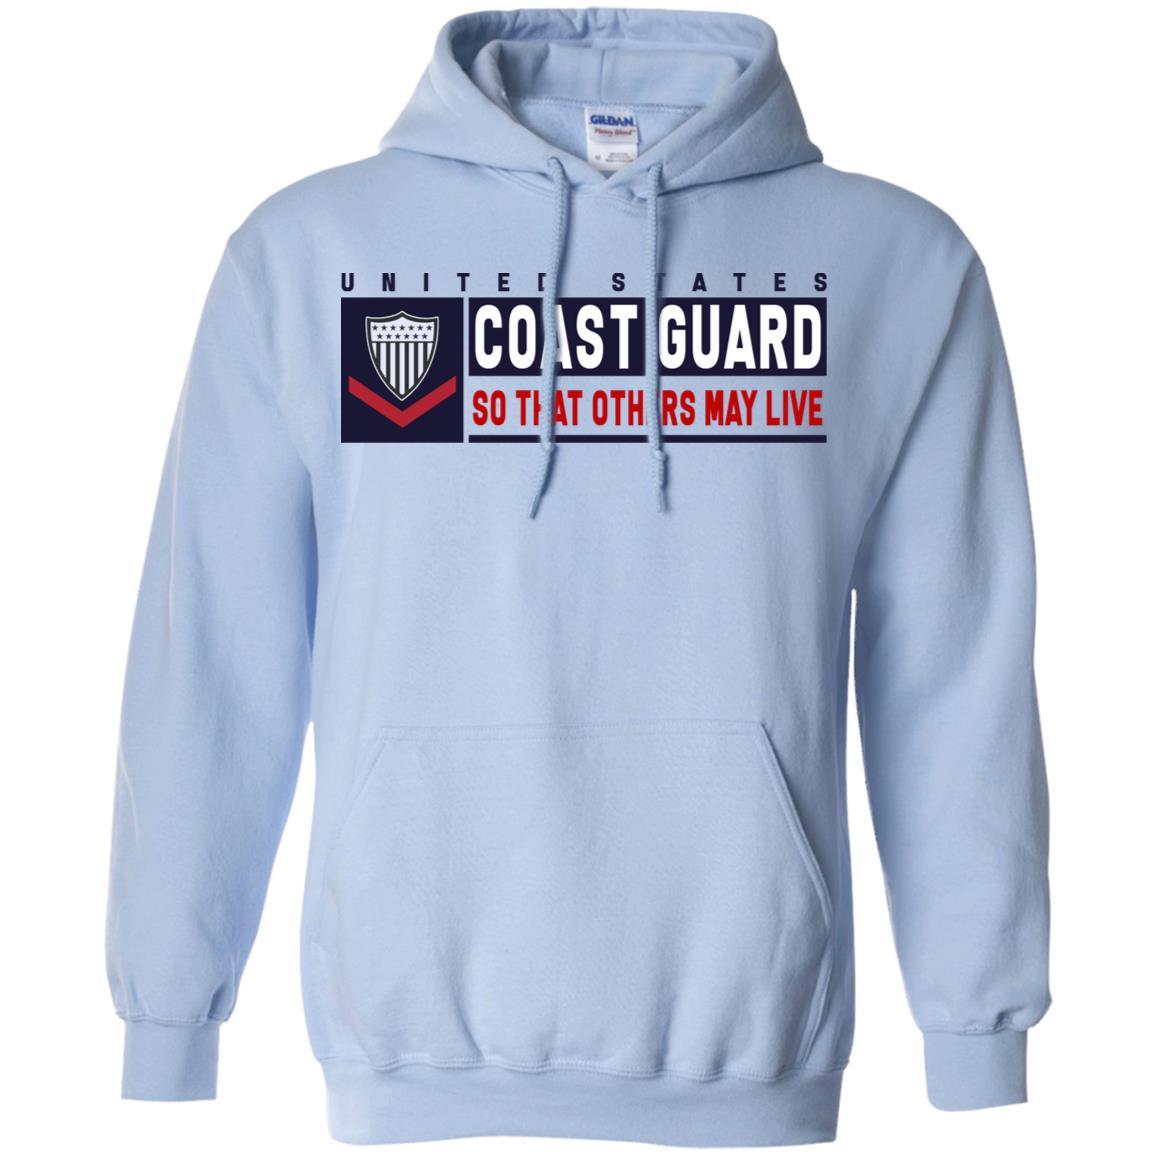 US Coast Guard E-4 Petty Officer Third Class E4 PO3 So That Others May Live Long Sleeve - Pullover Hoodie-TShirt-USCG-Veterans Nation